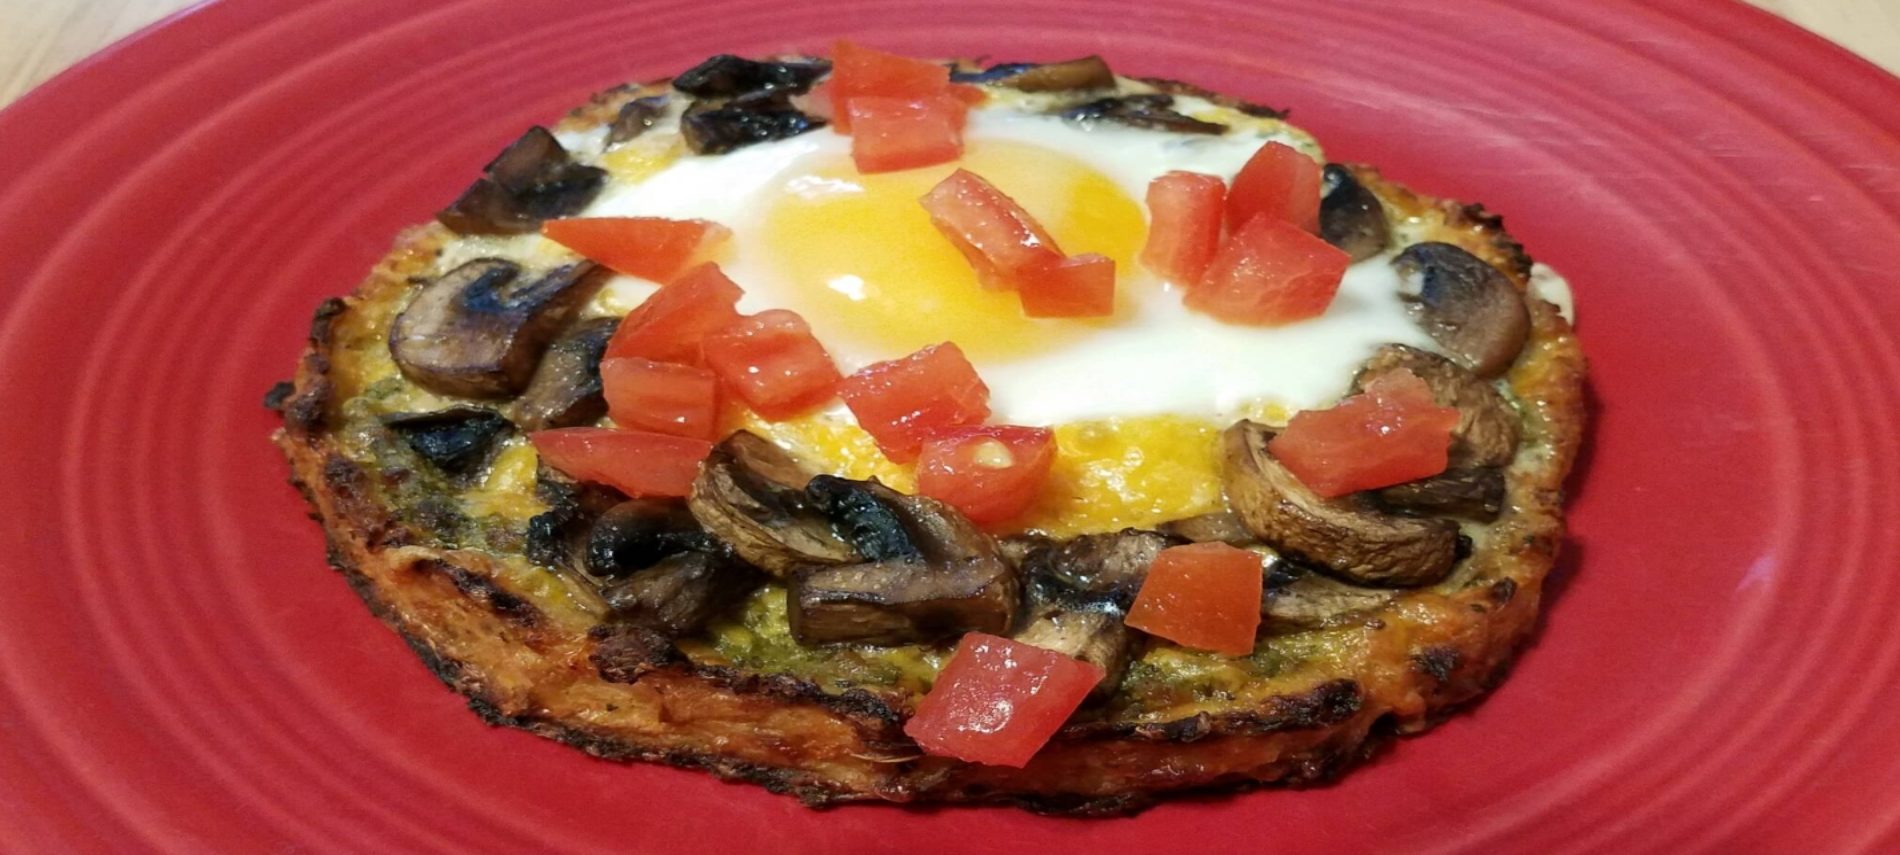 small round pizza with mushrooms, egg and yellow yolk topped with chopped tomatoes on a red plate